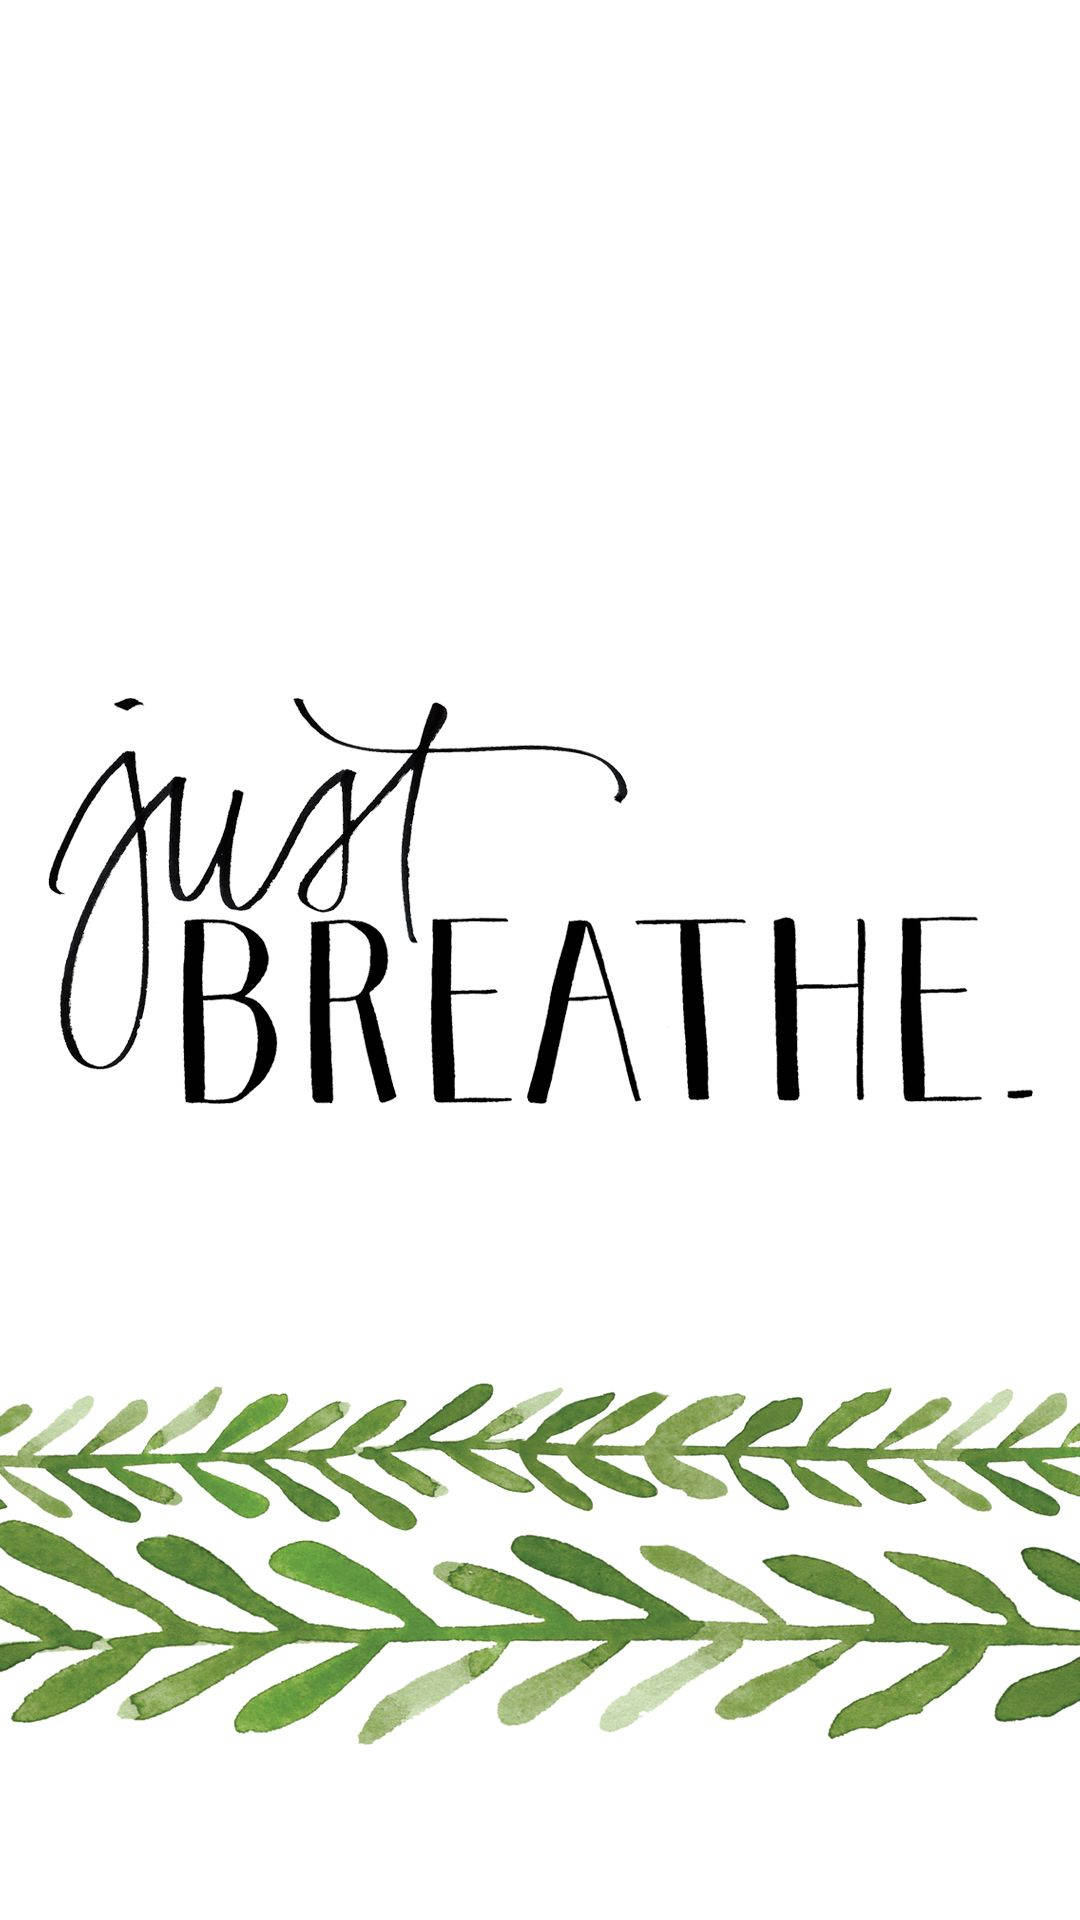 Just breathe ON FINE ART PAPER HD QUALITY WALLPAPER POSTER Fine Art Print -  Decorative posters in India - Buy art, film, design, movie, music, nature  and educational paintings/wallpapers at Flipkart.com